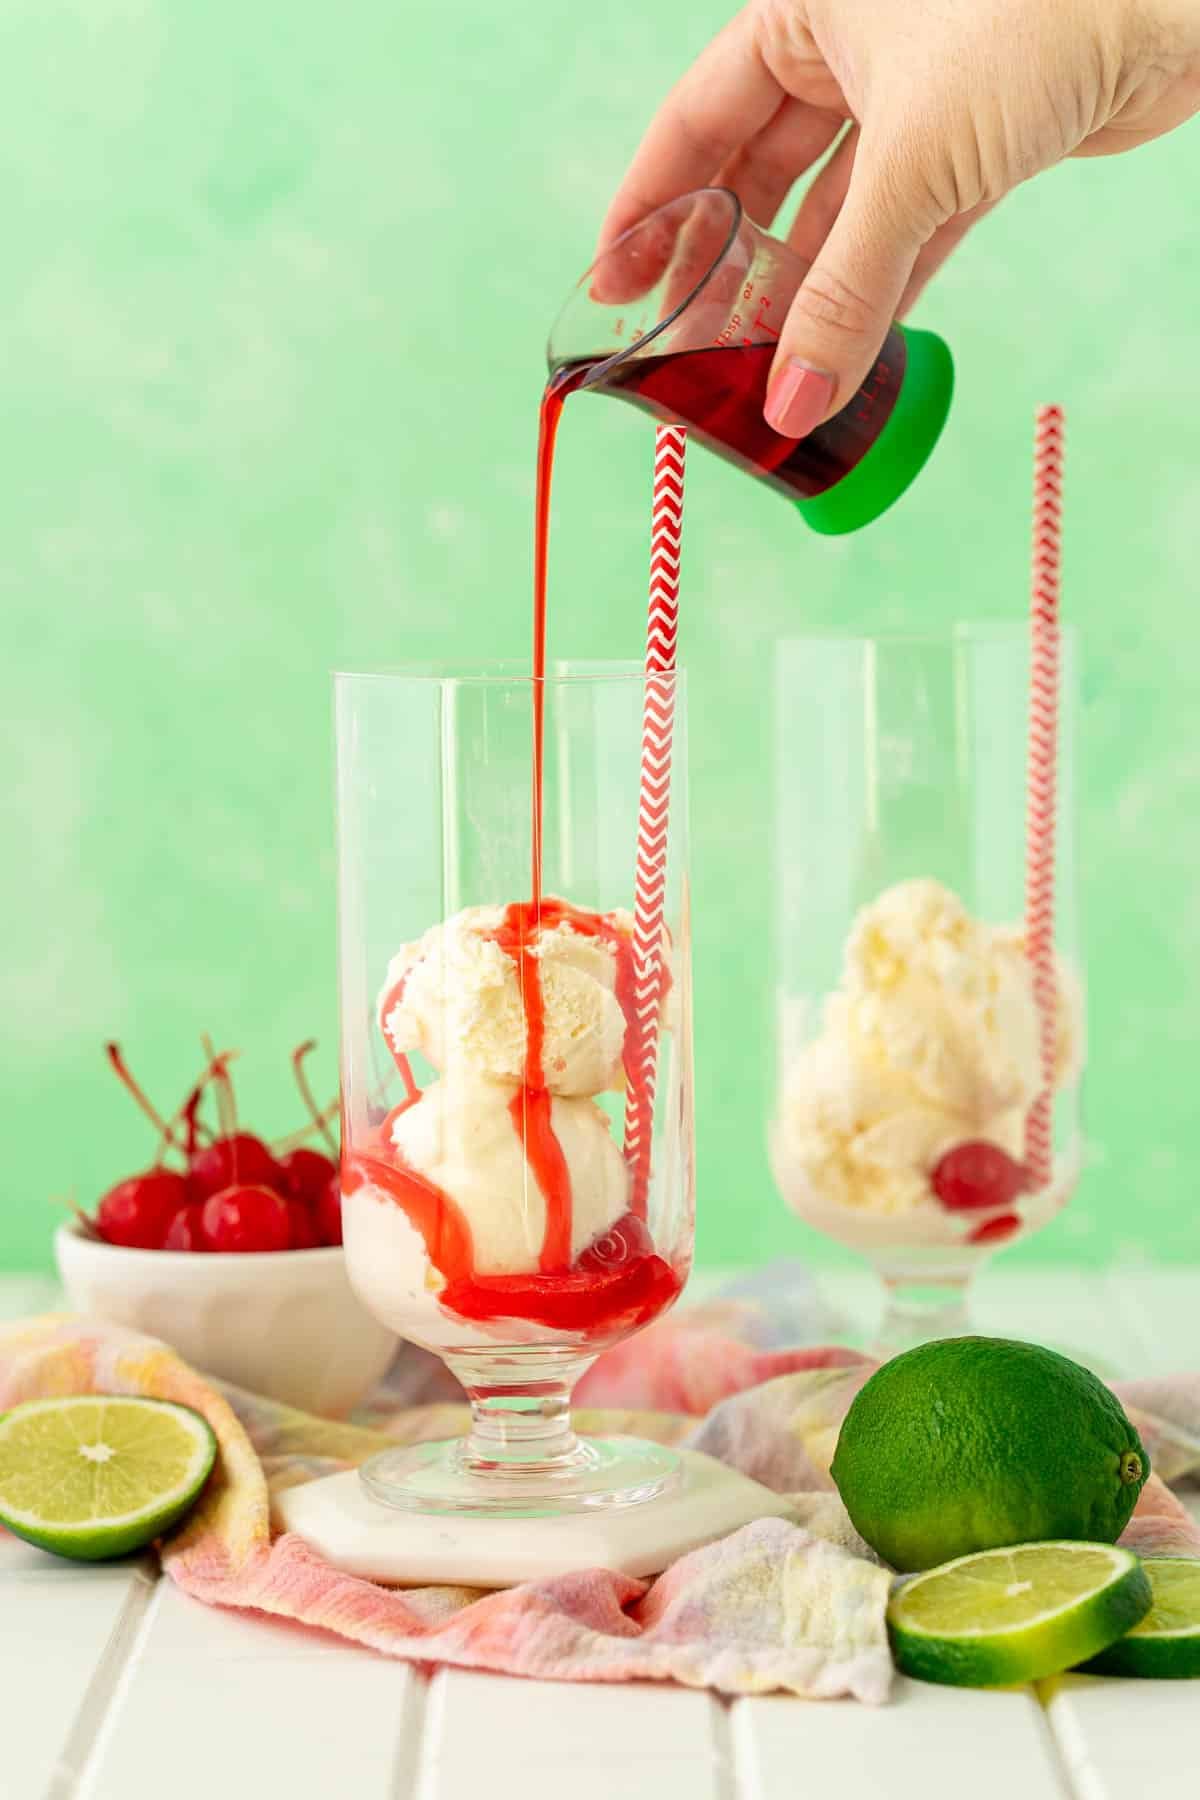 Grenadine syrup being poured over scoops of vanilla ice cream in a glass.